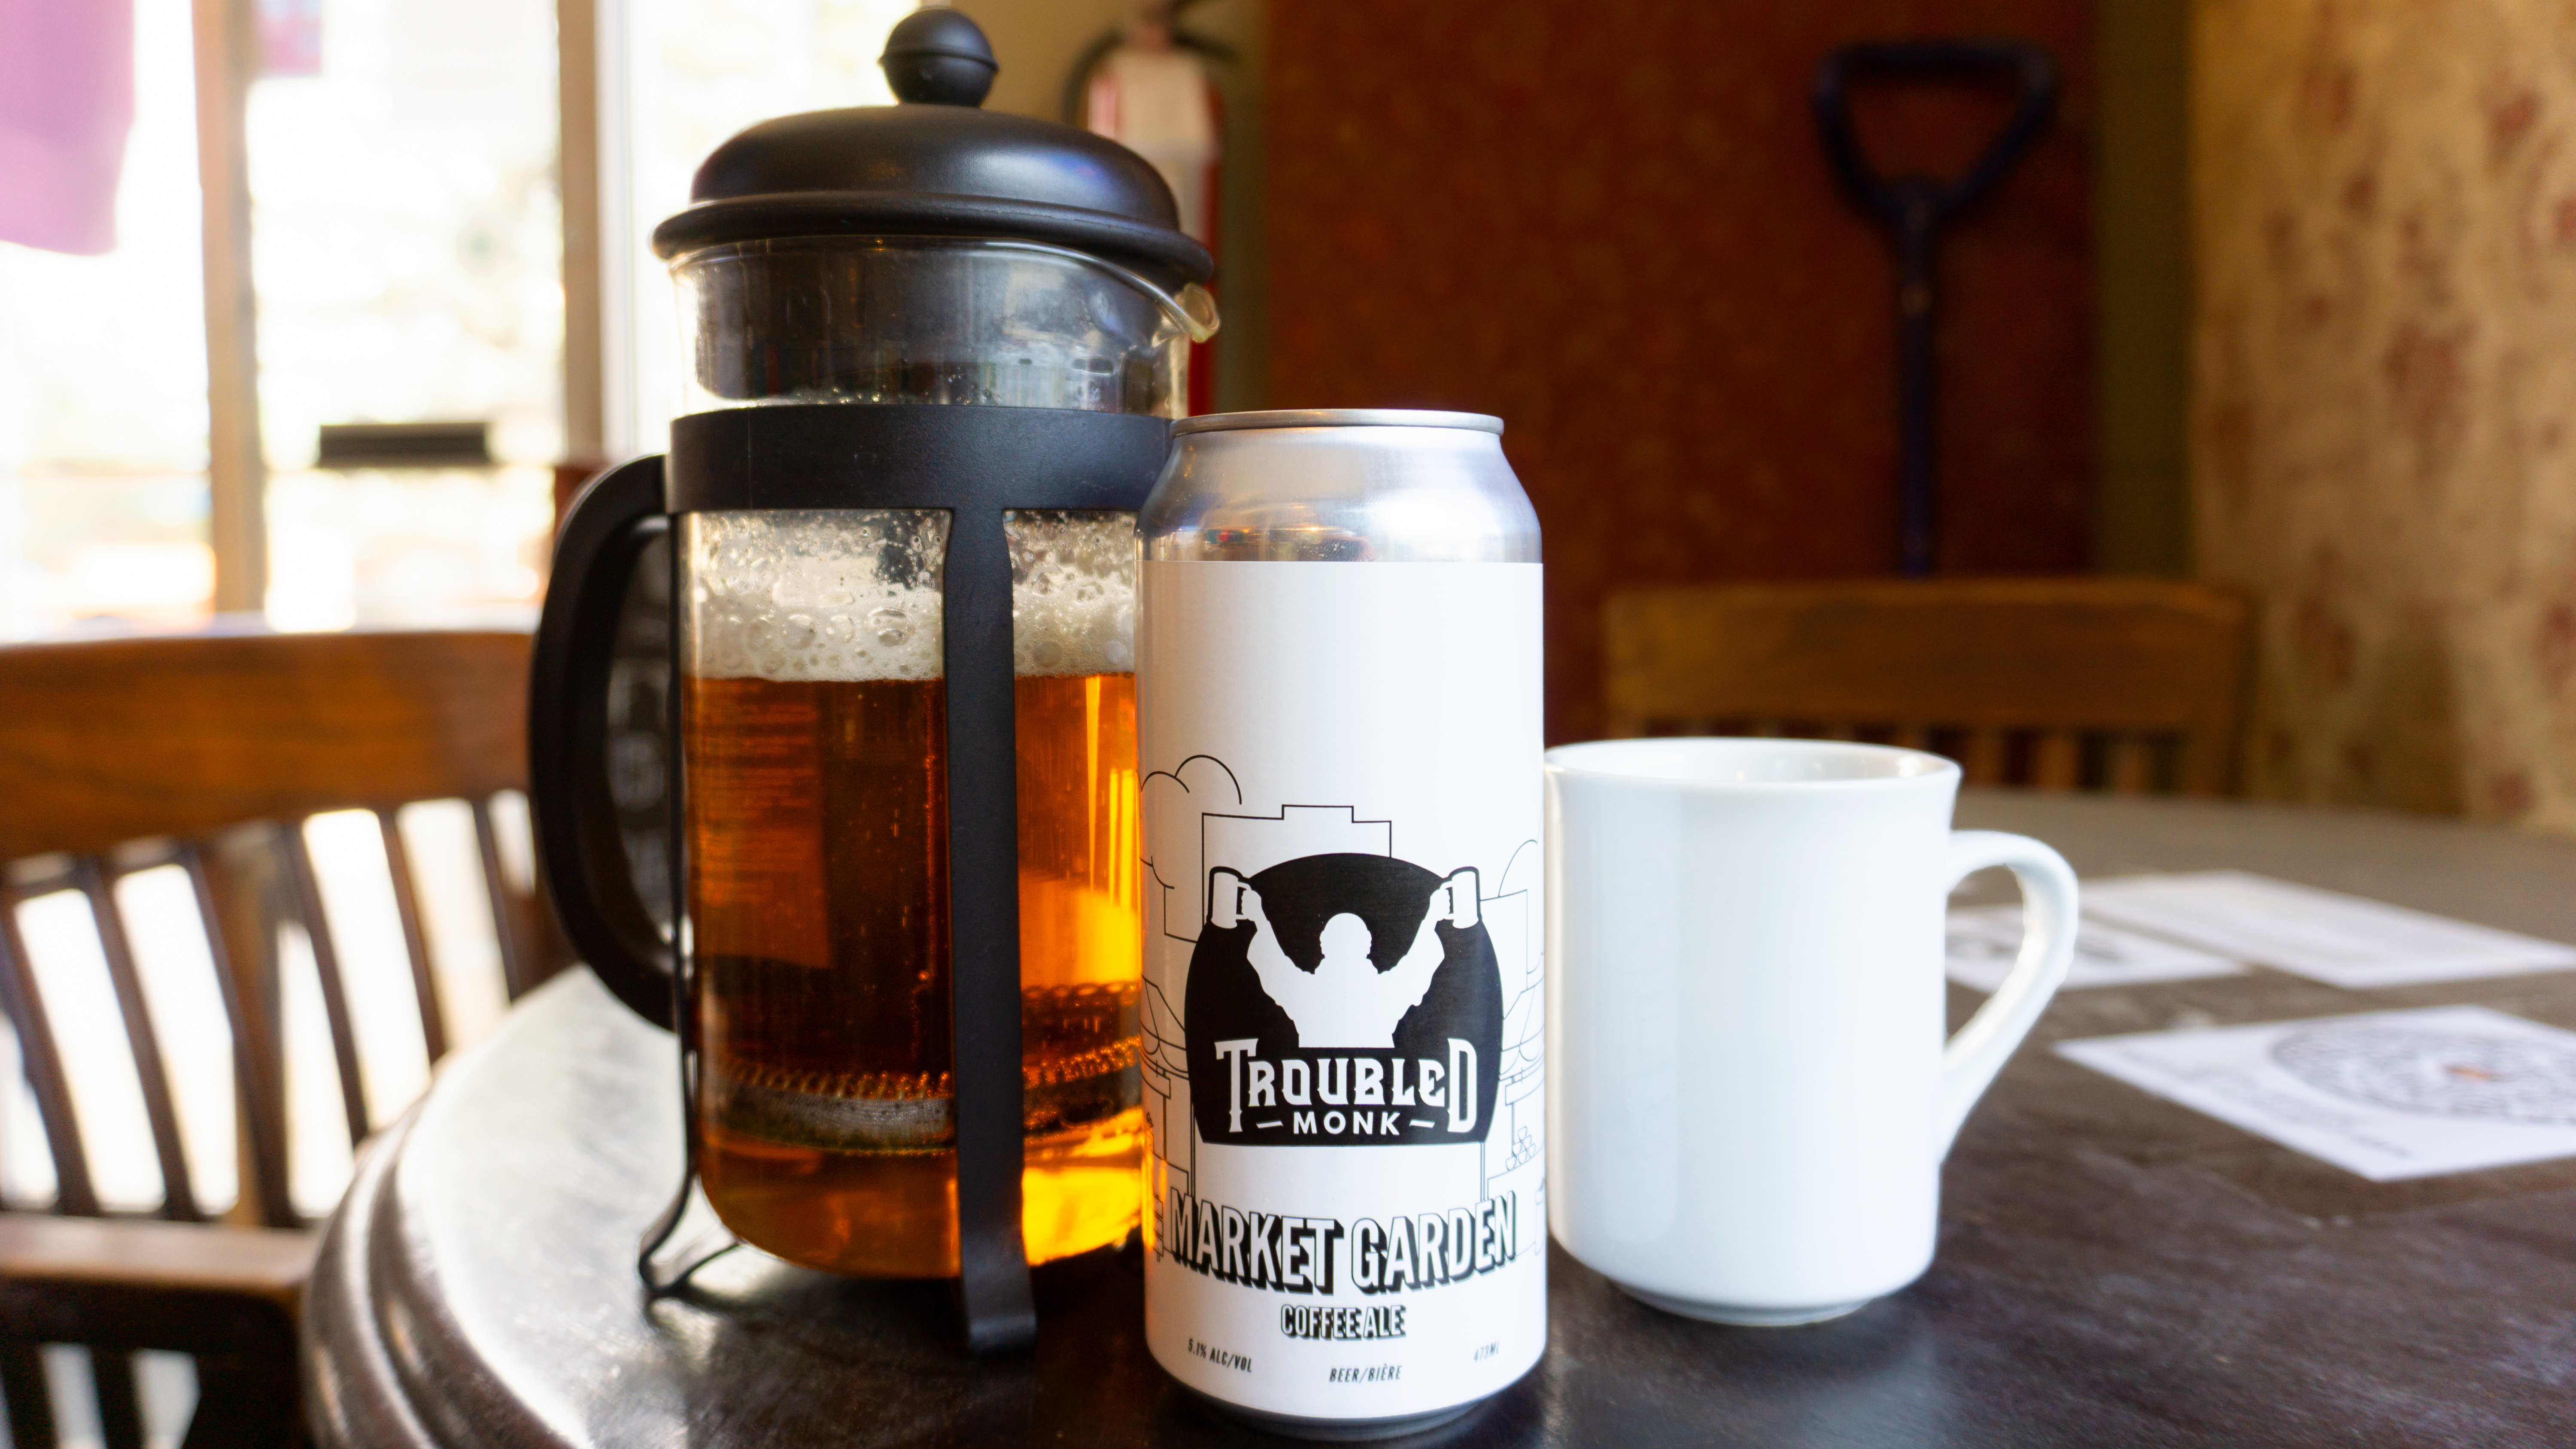 Picture of a coffee cup, a french press and a can of troubled monk's market garden coffee ale